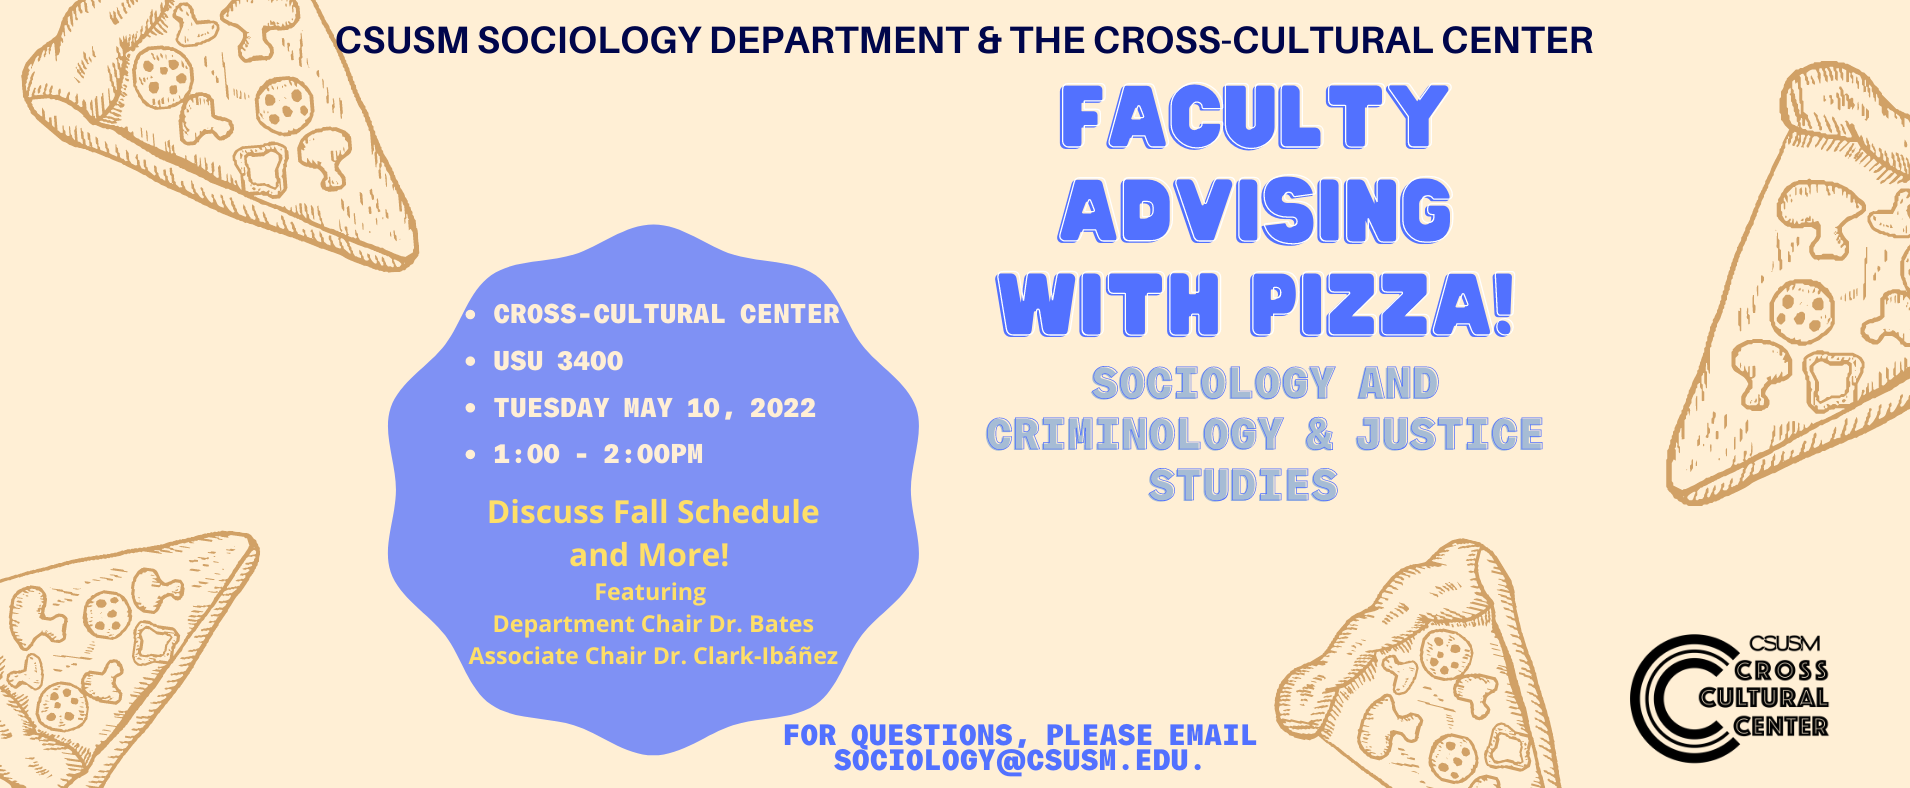 Faculty Advising with Pizza! - Tuesday, May 10, 2022 - 1pm to 2pm - Cross-Cultural Center (USU 3400)